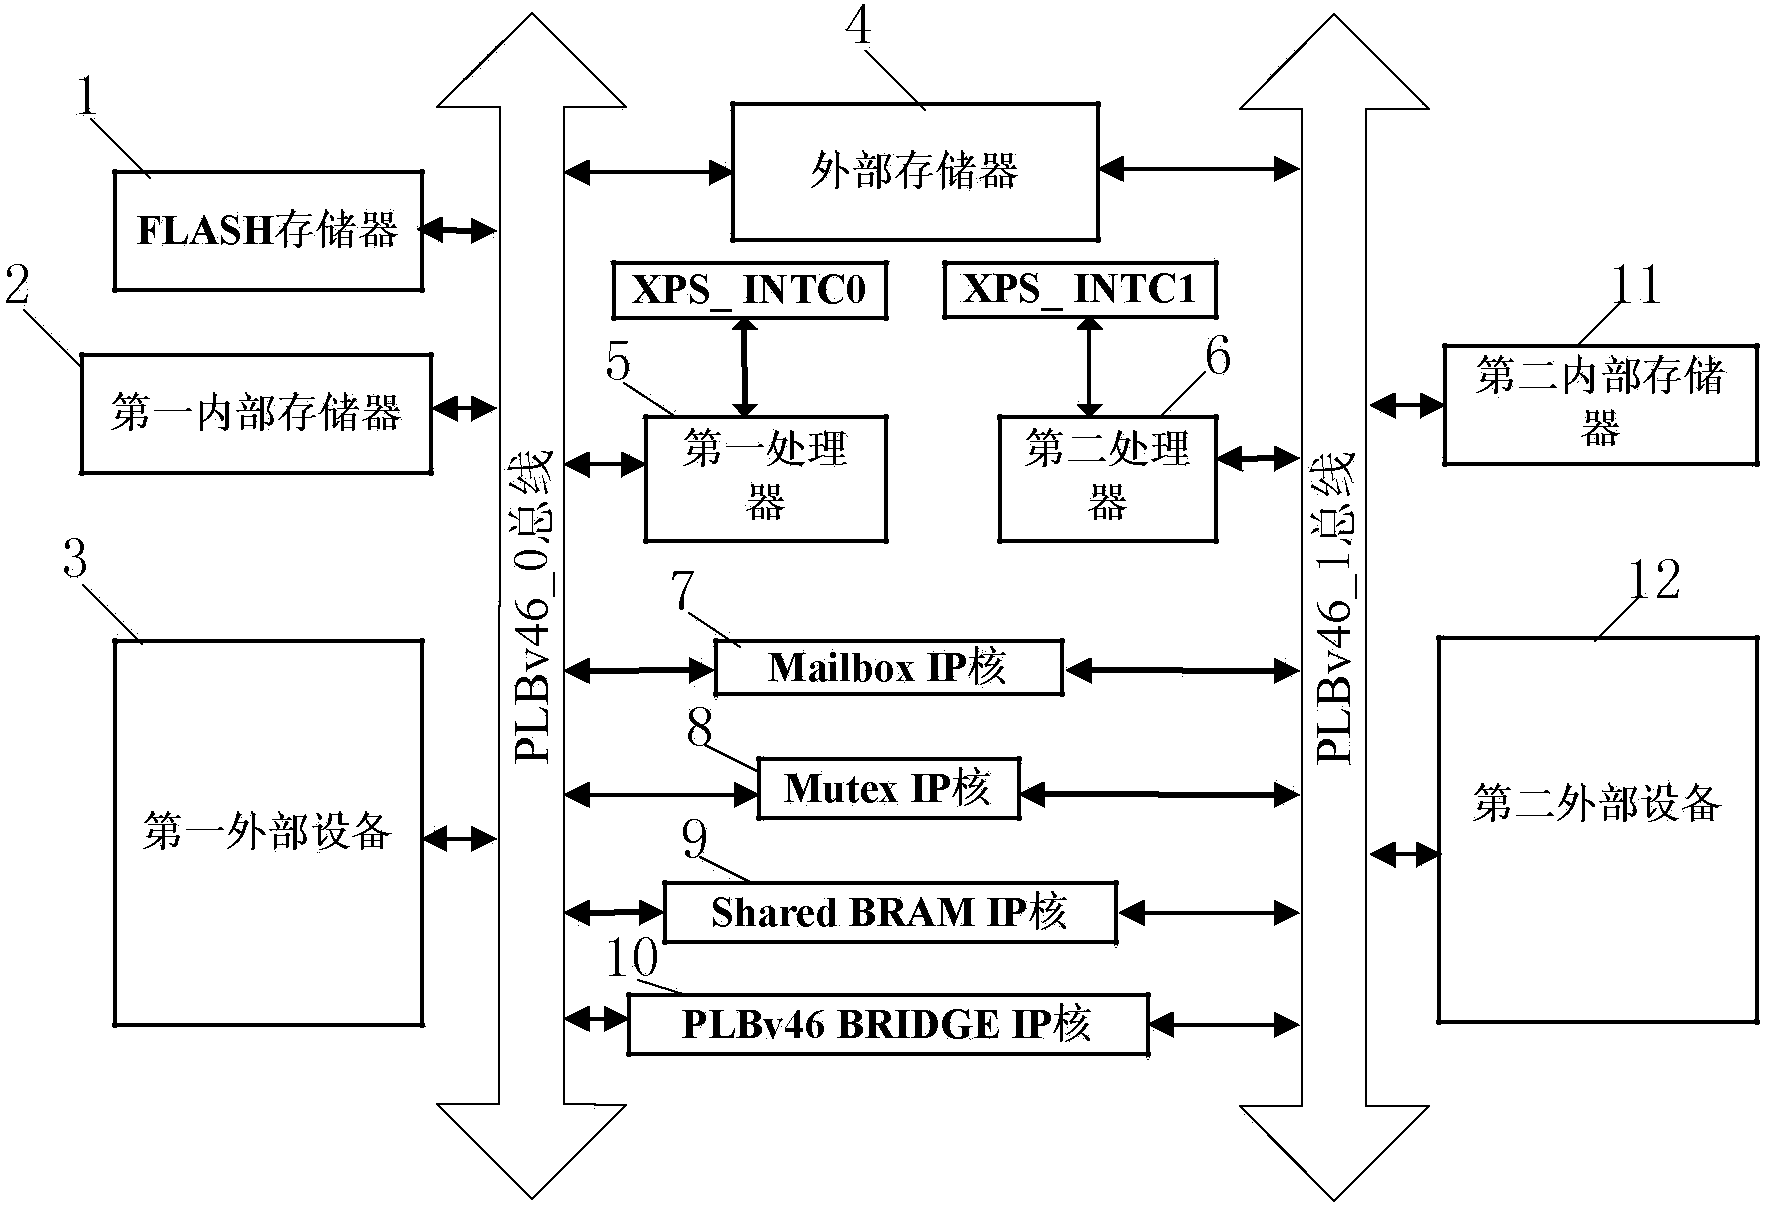 Autonomous configuration method for FPGA (field programmable gate array)-based embedded dual-core system